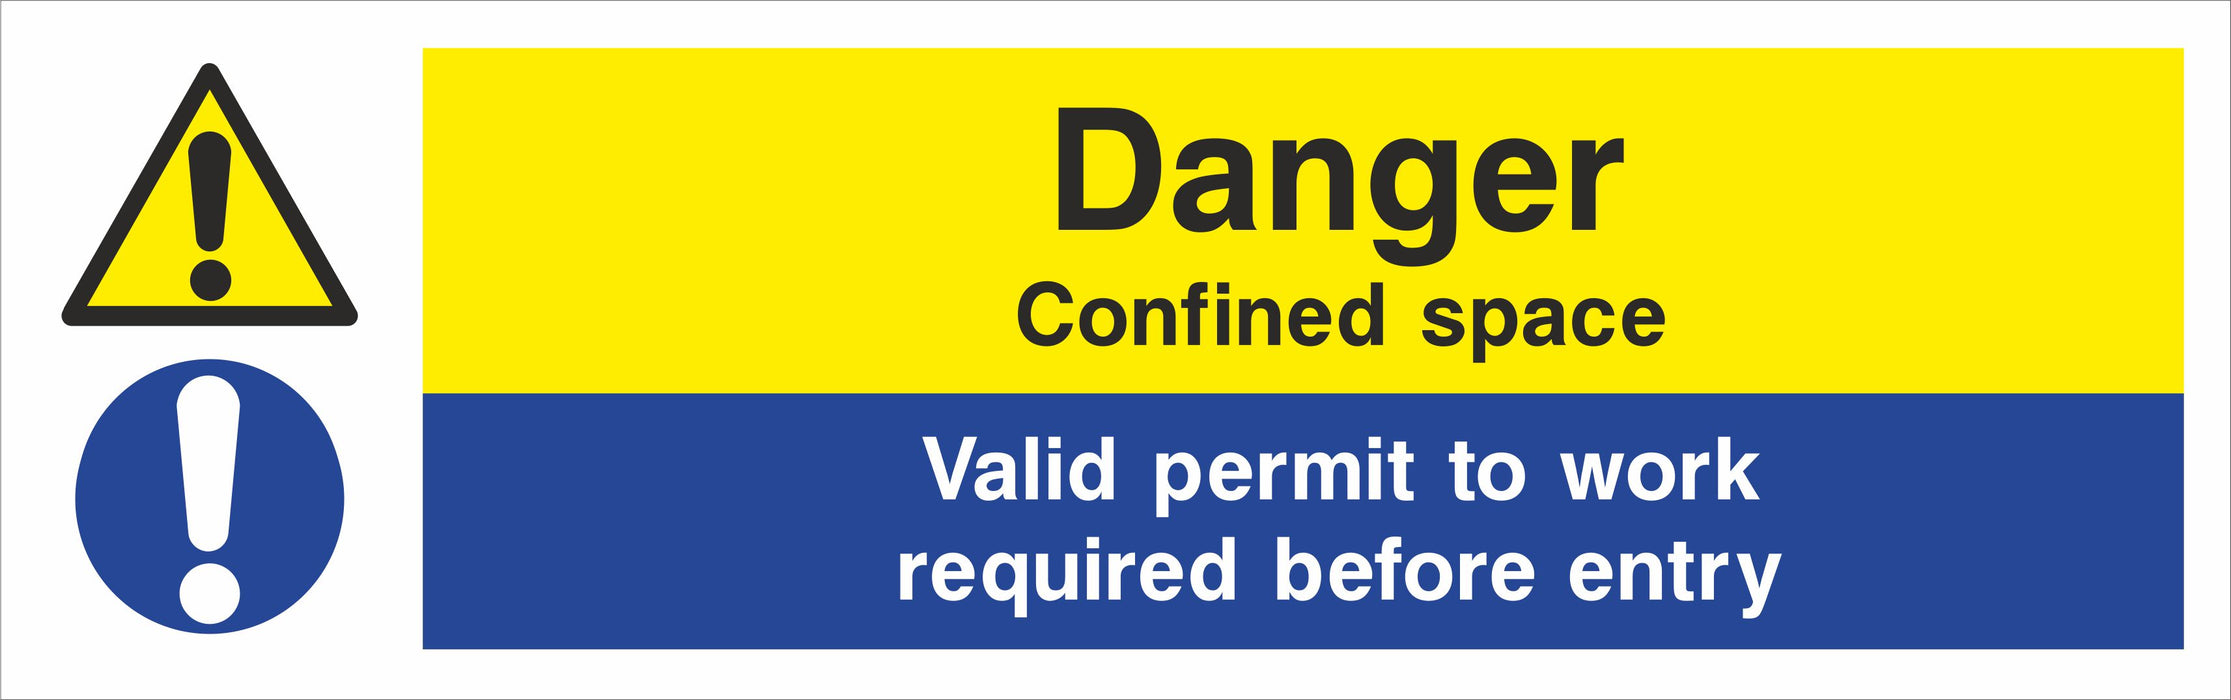 Danger Confined space Valid permit to work required before entry